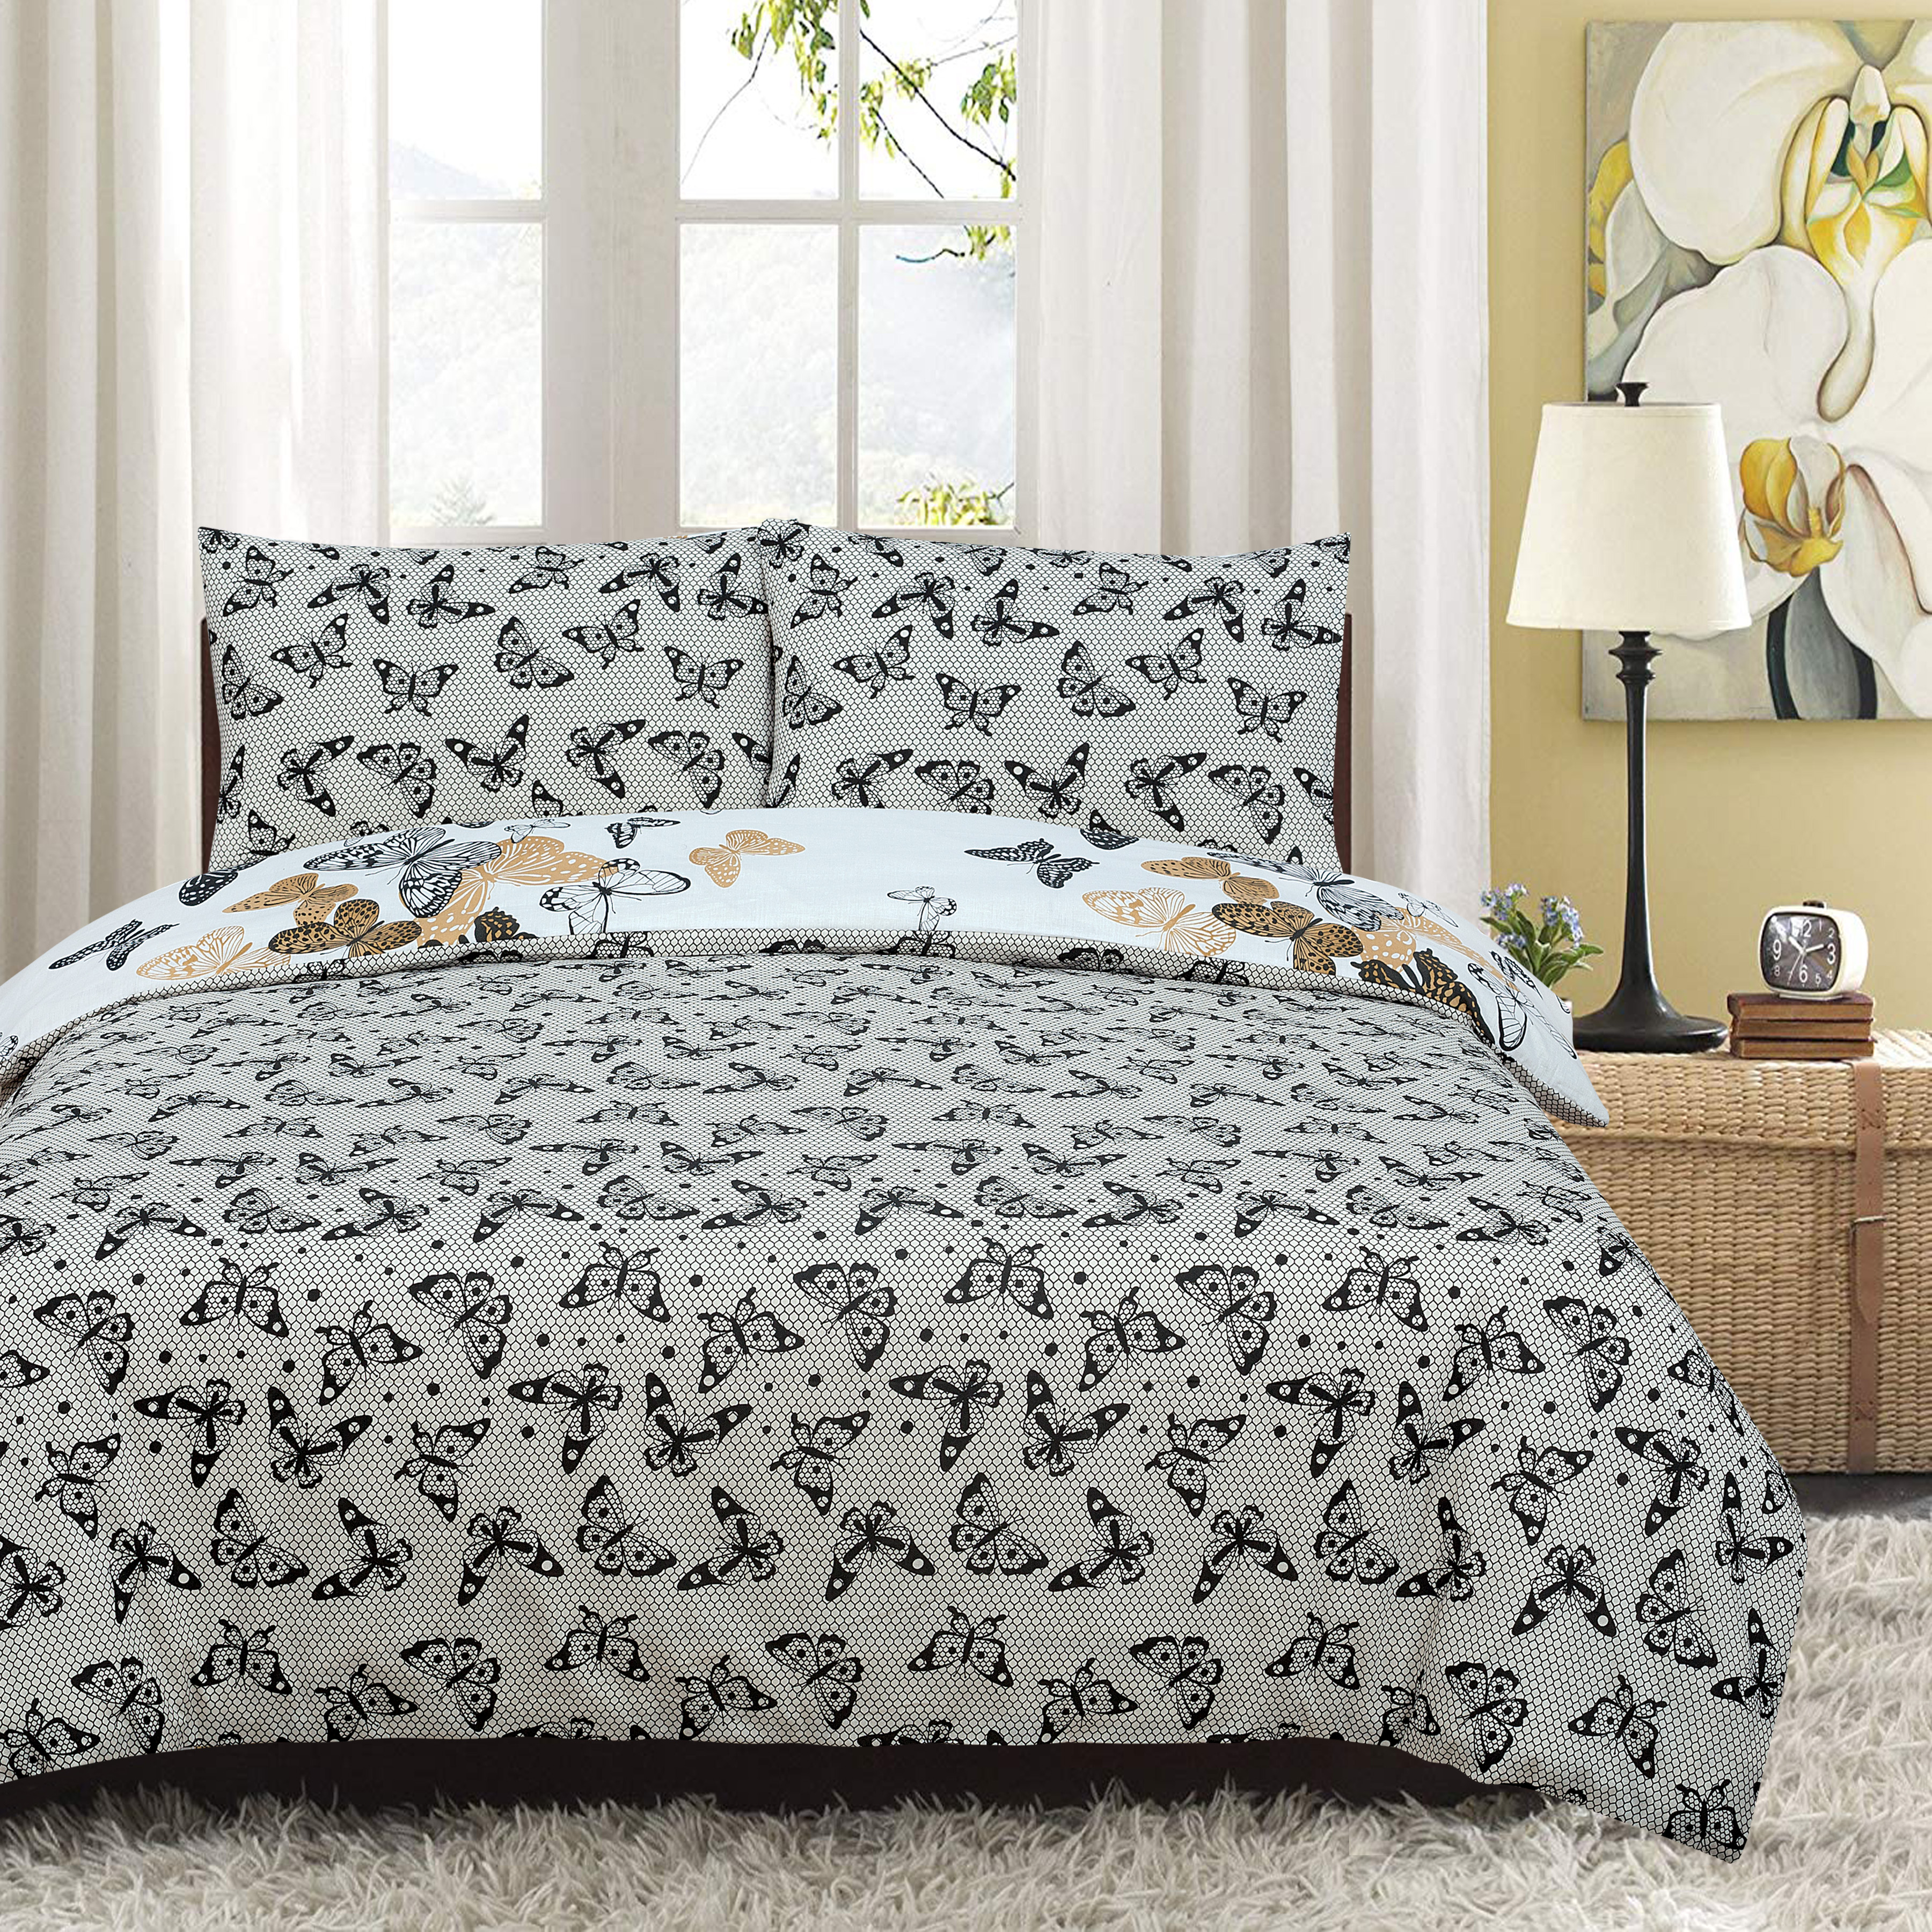 Butterfly Kids Reversible Rotary Single Bed Duvet Quilt Cover Set